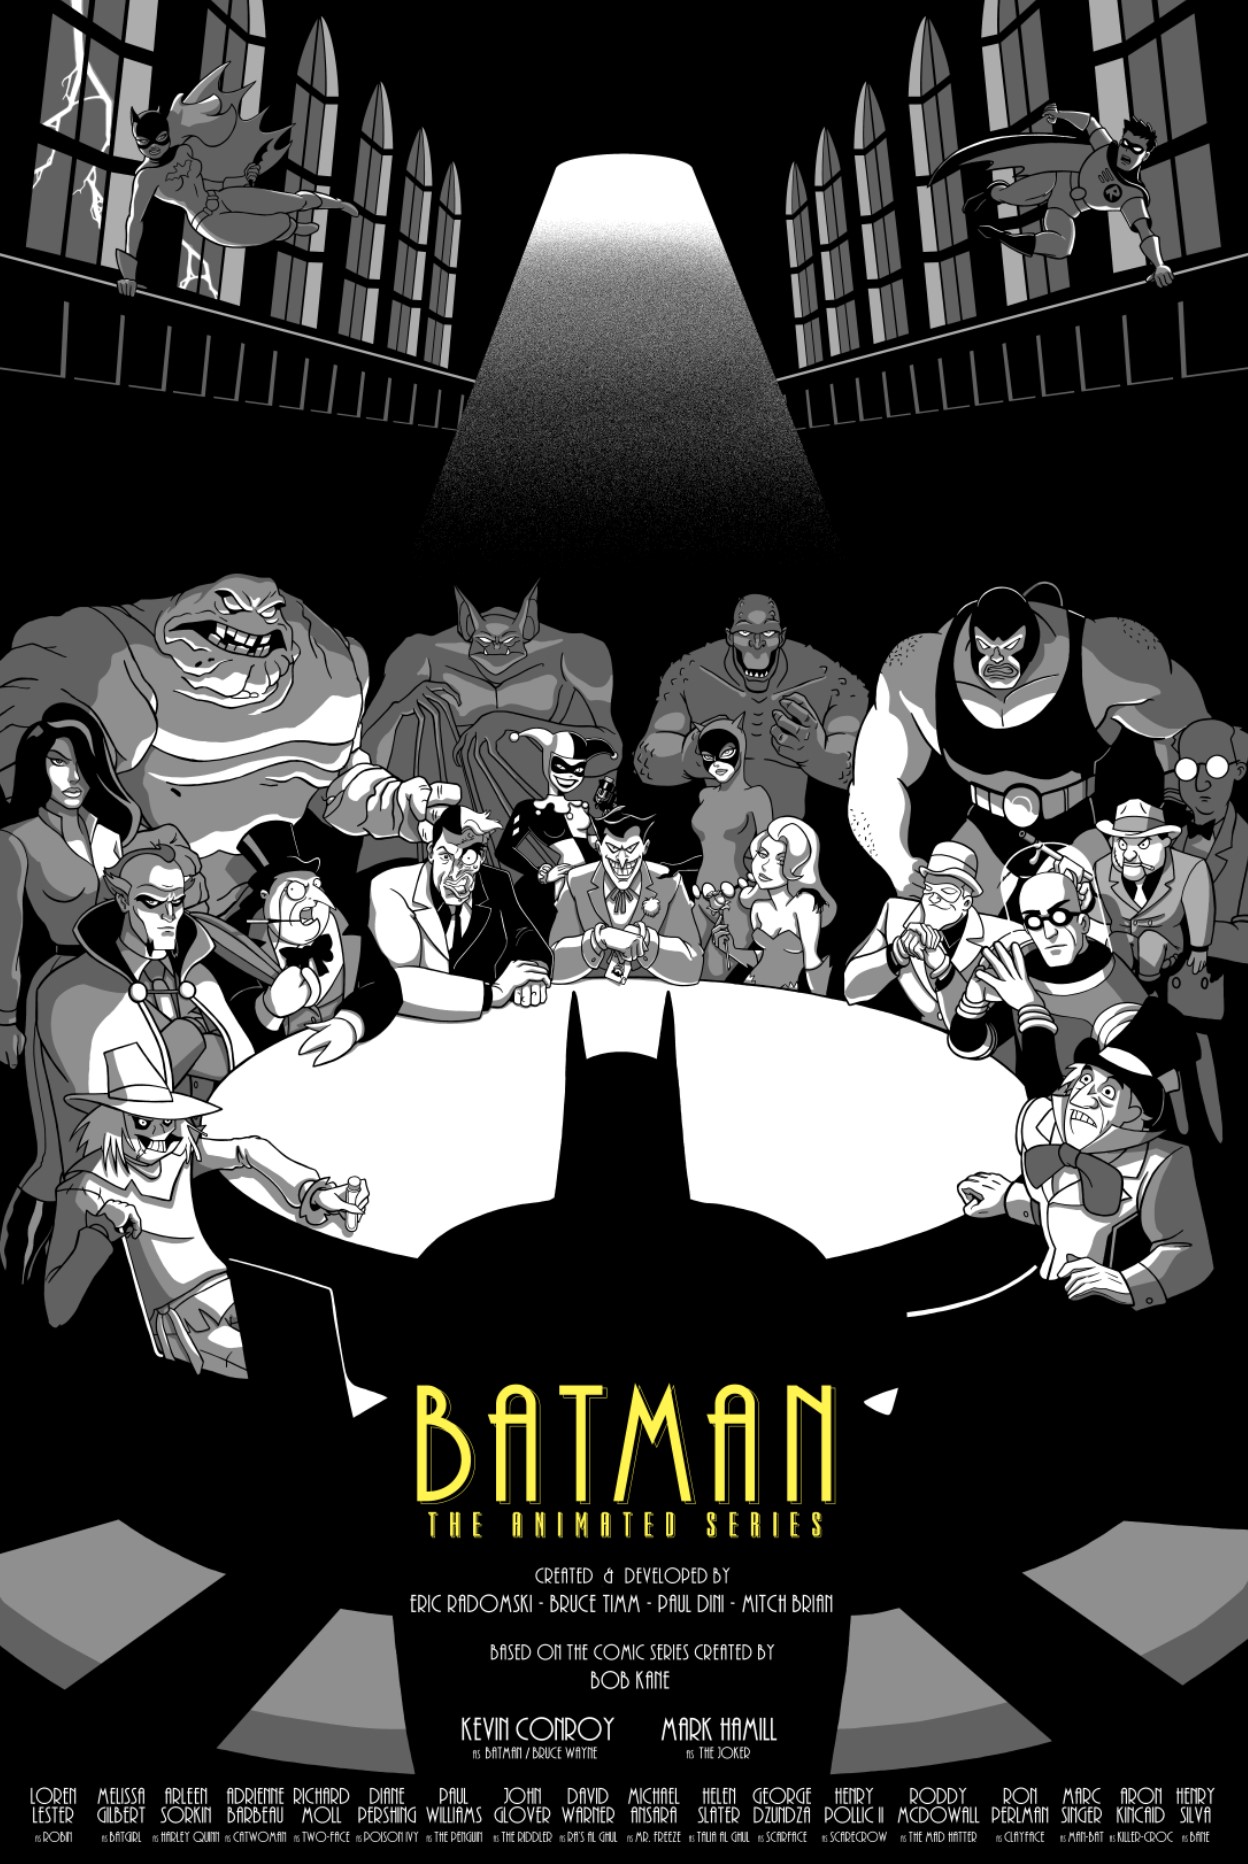 Batman: The Animated Series “The AA Meeting” 24×36 15 colour reg and 5 colour variant with GID and yellow gloas varnish screenprint